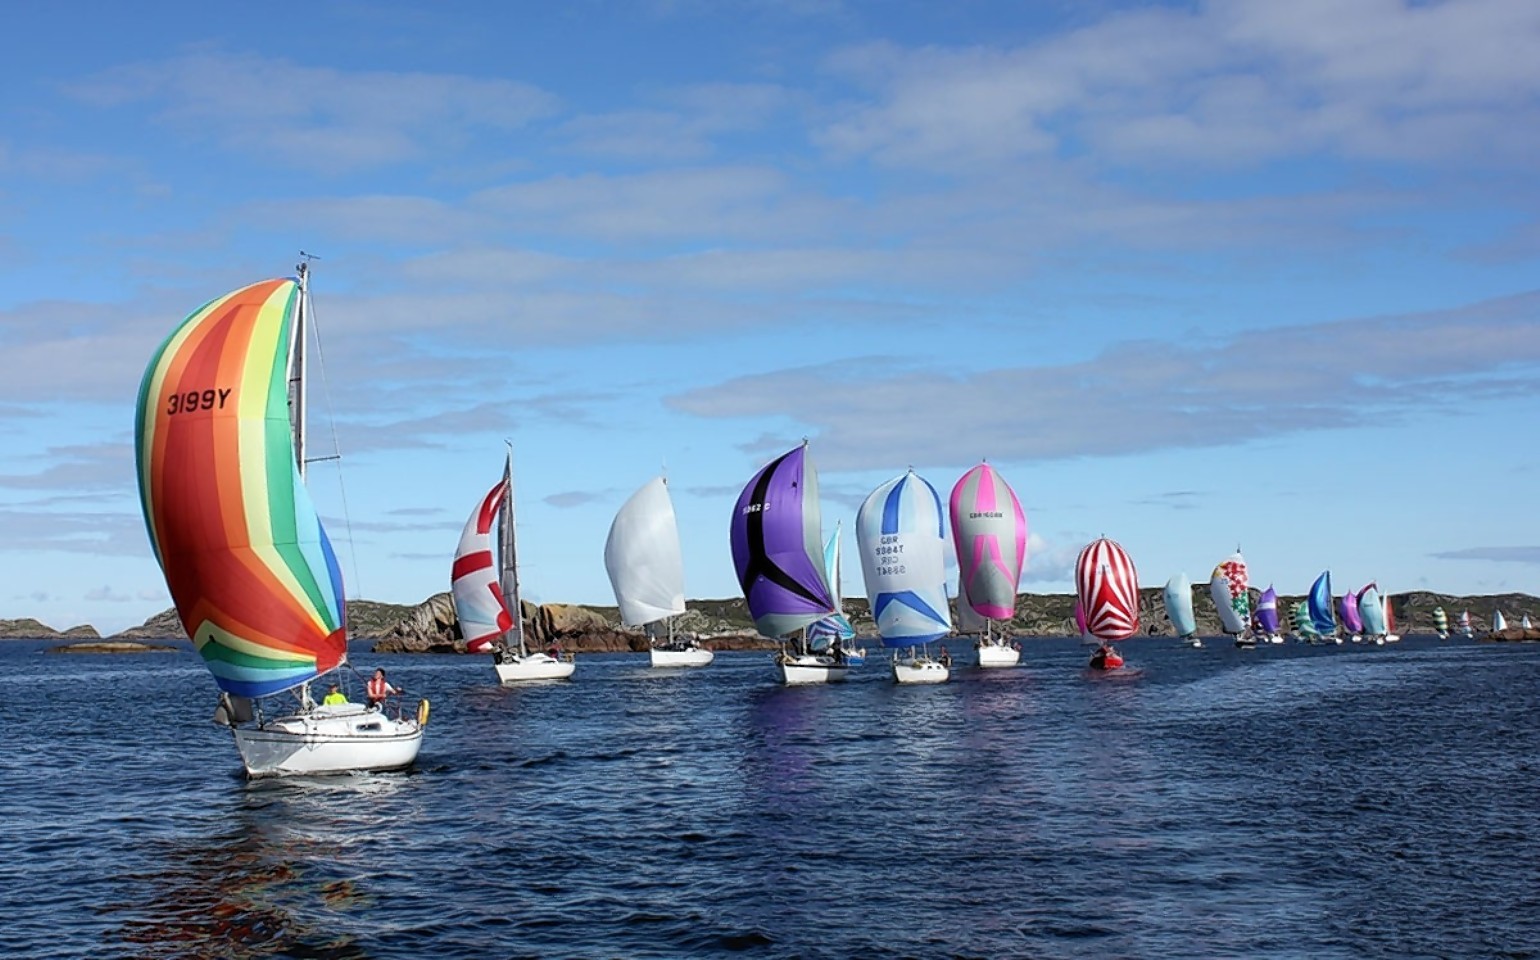 Sailing clubs across the country will take part.